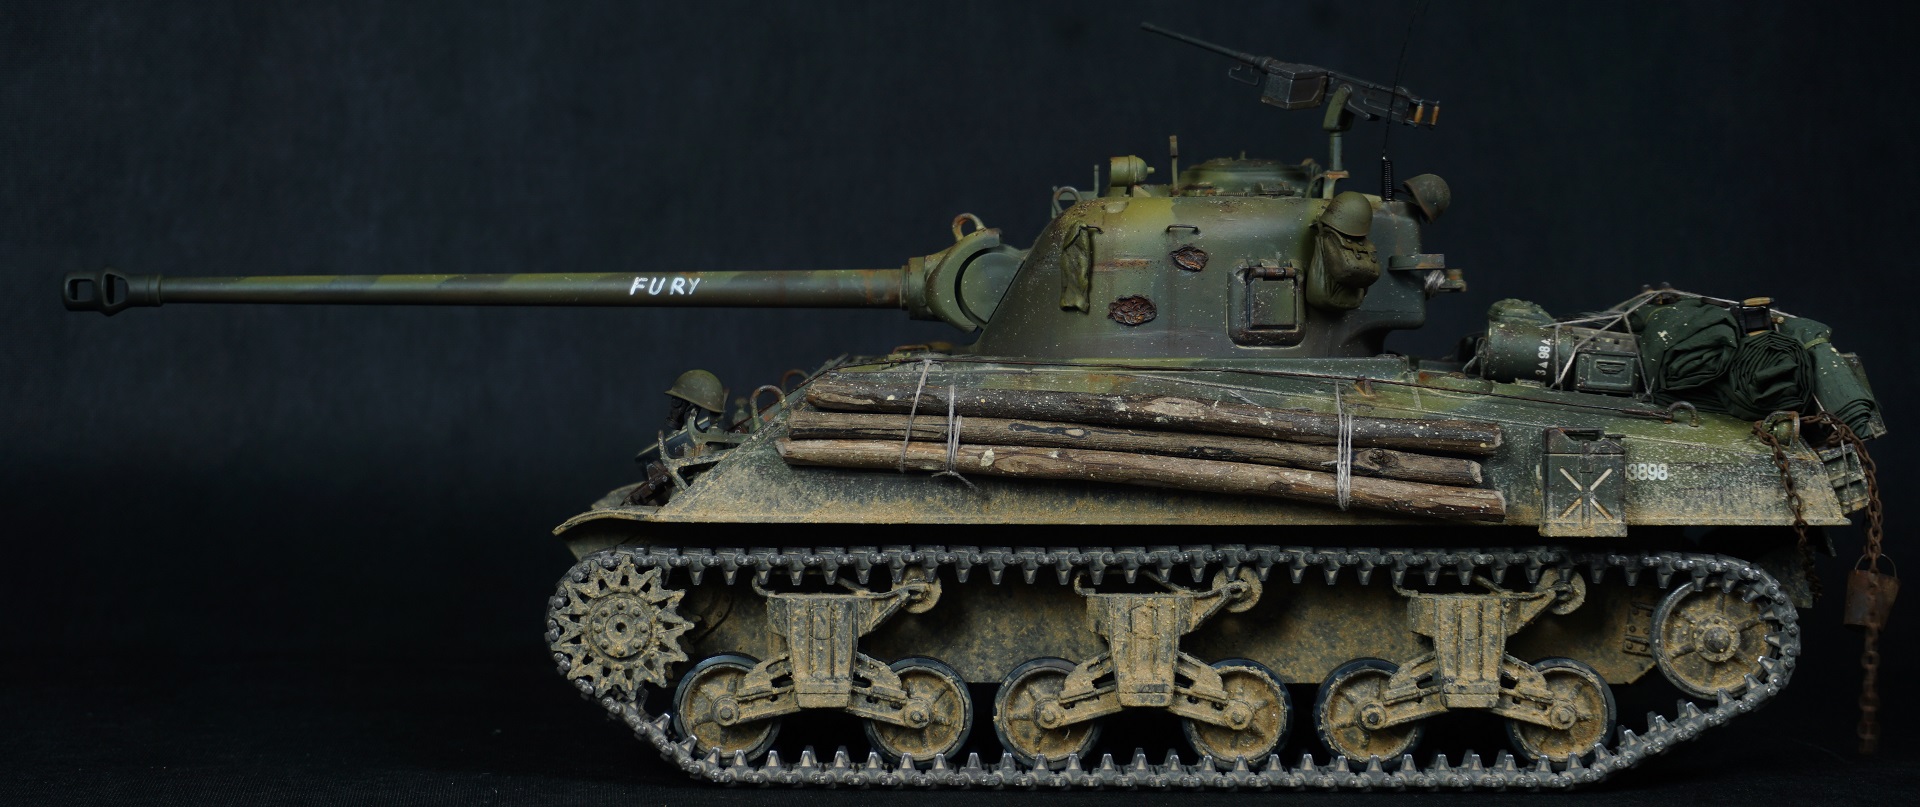 How to add Tank Accessory set for Custom paint & Weathering M4A3E8 SHERMAN "FURY" RC Tank 8